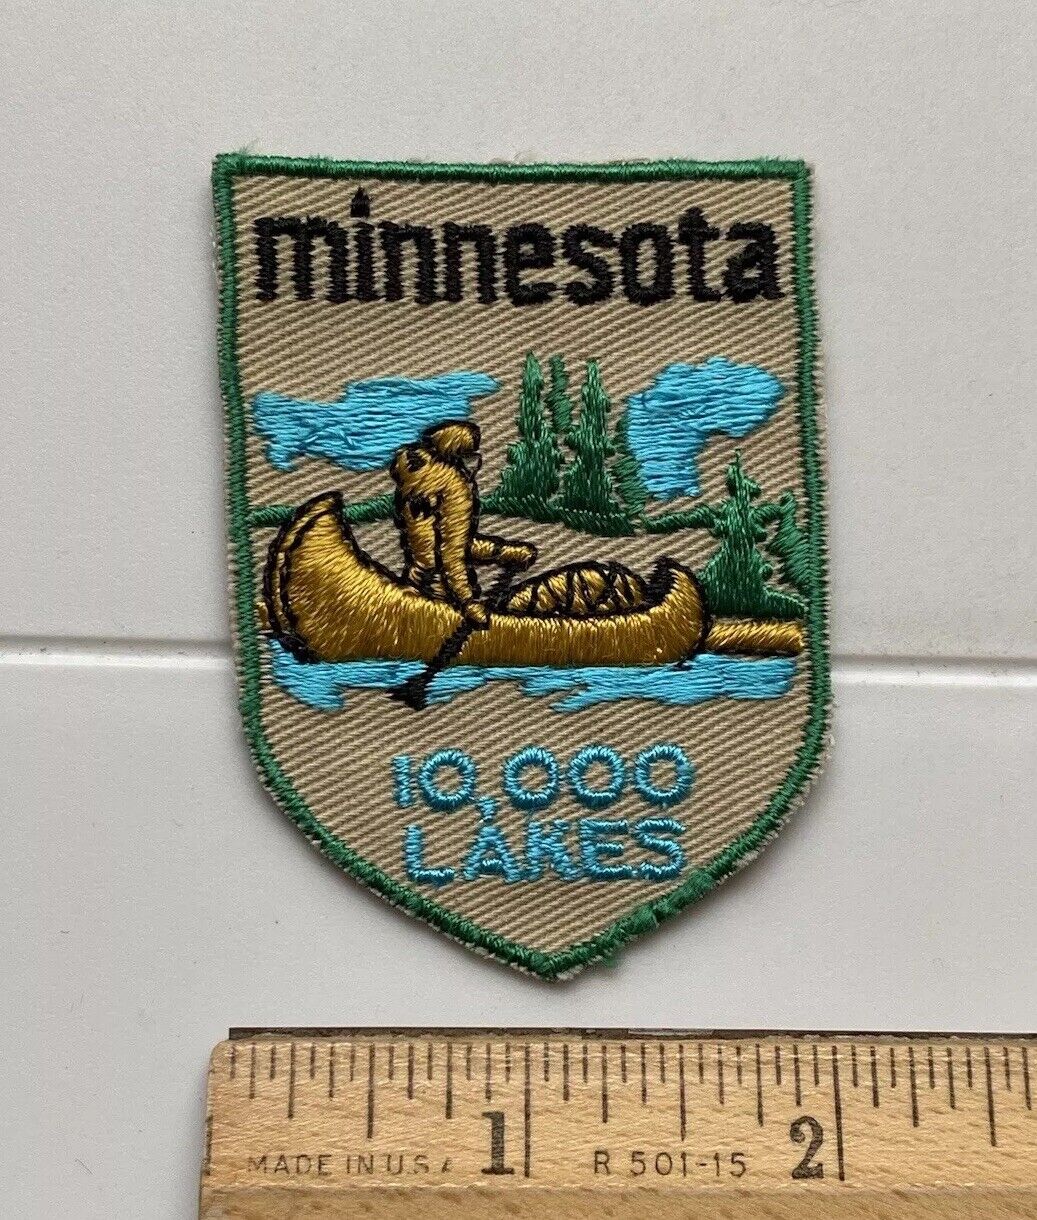 Minnesota Land of 10,000 Lakes Canoe Canoeing Souvenir Embroidered Patch Badge